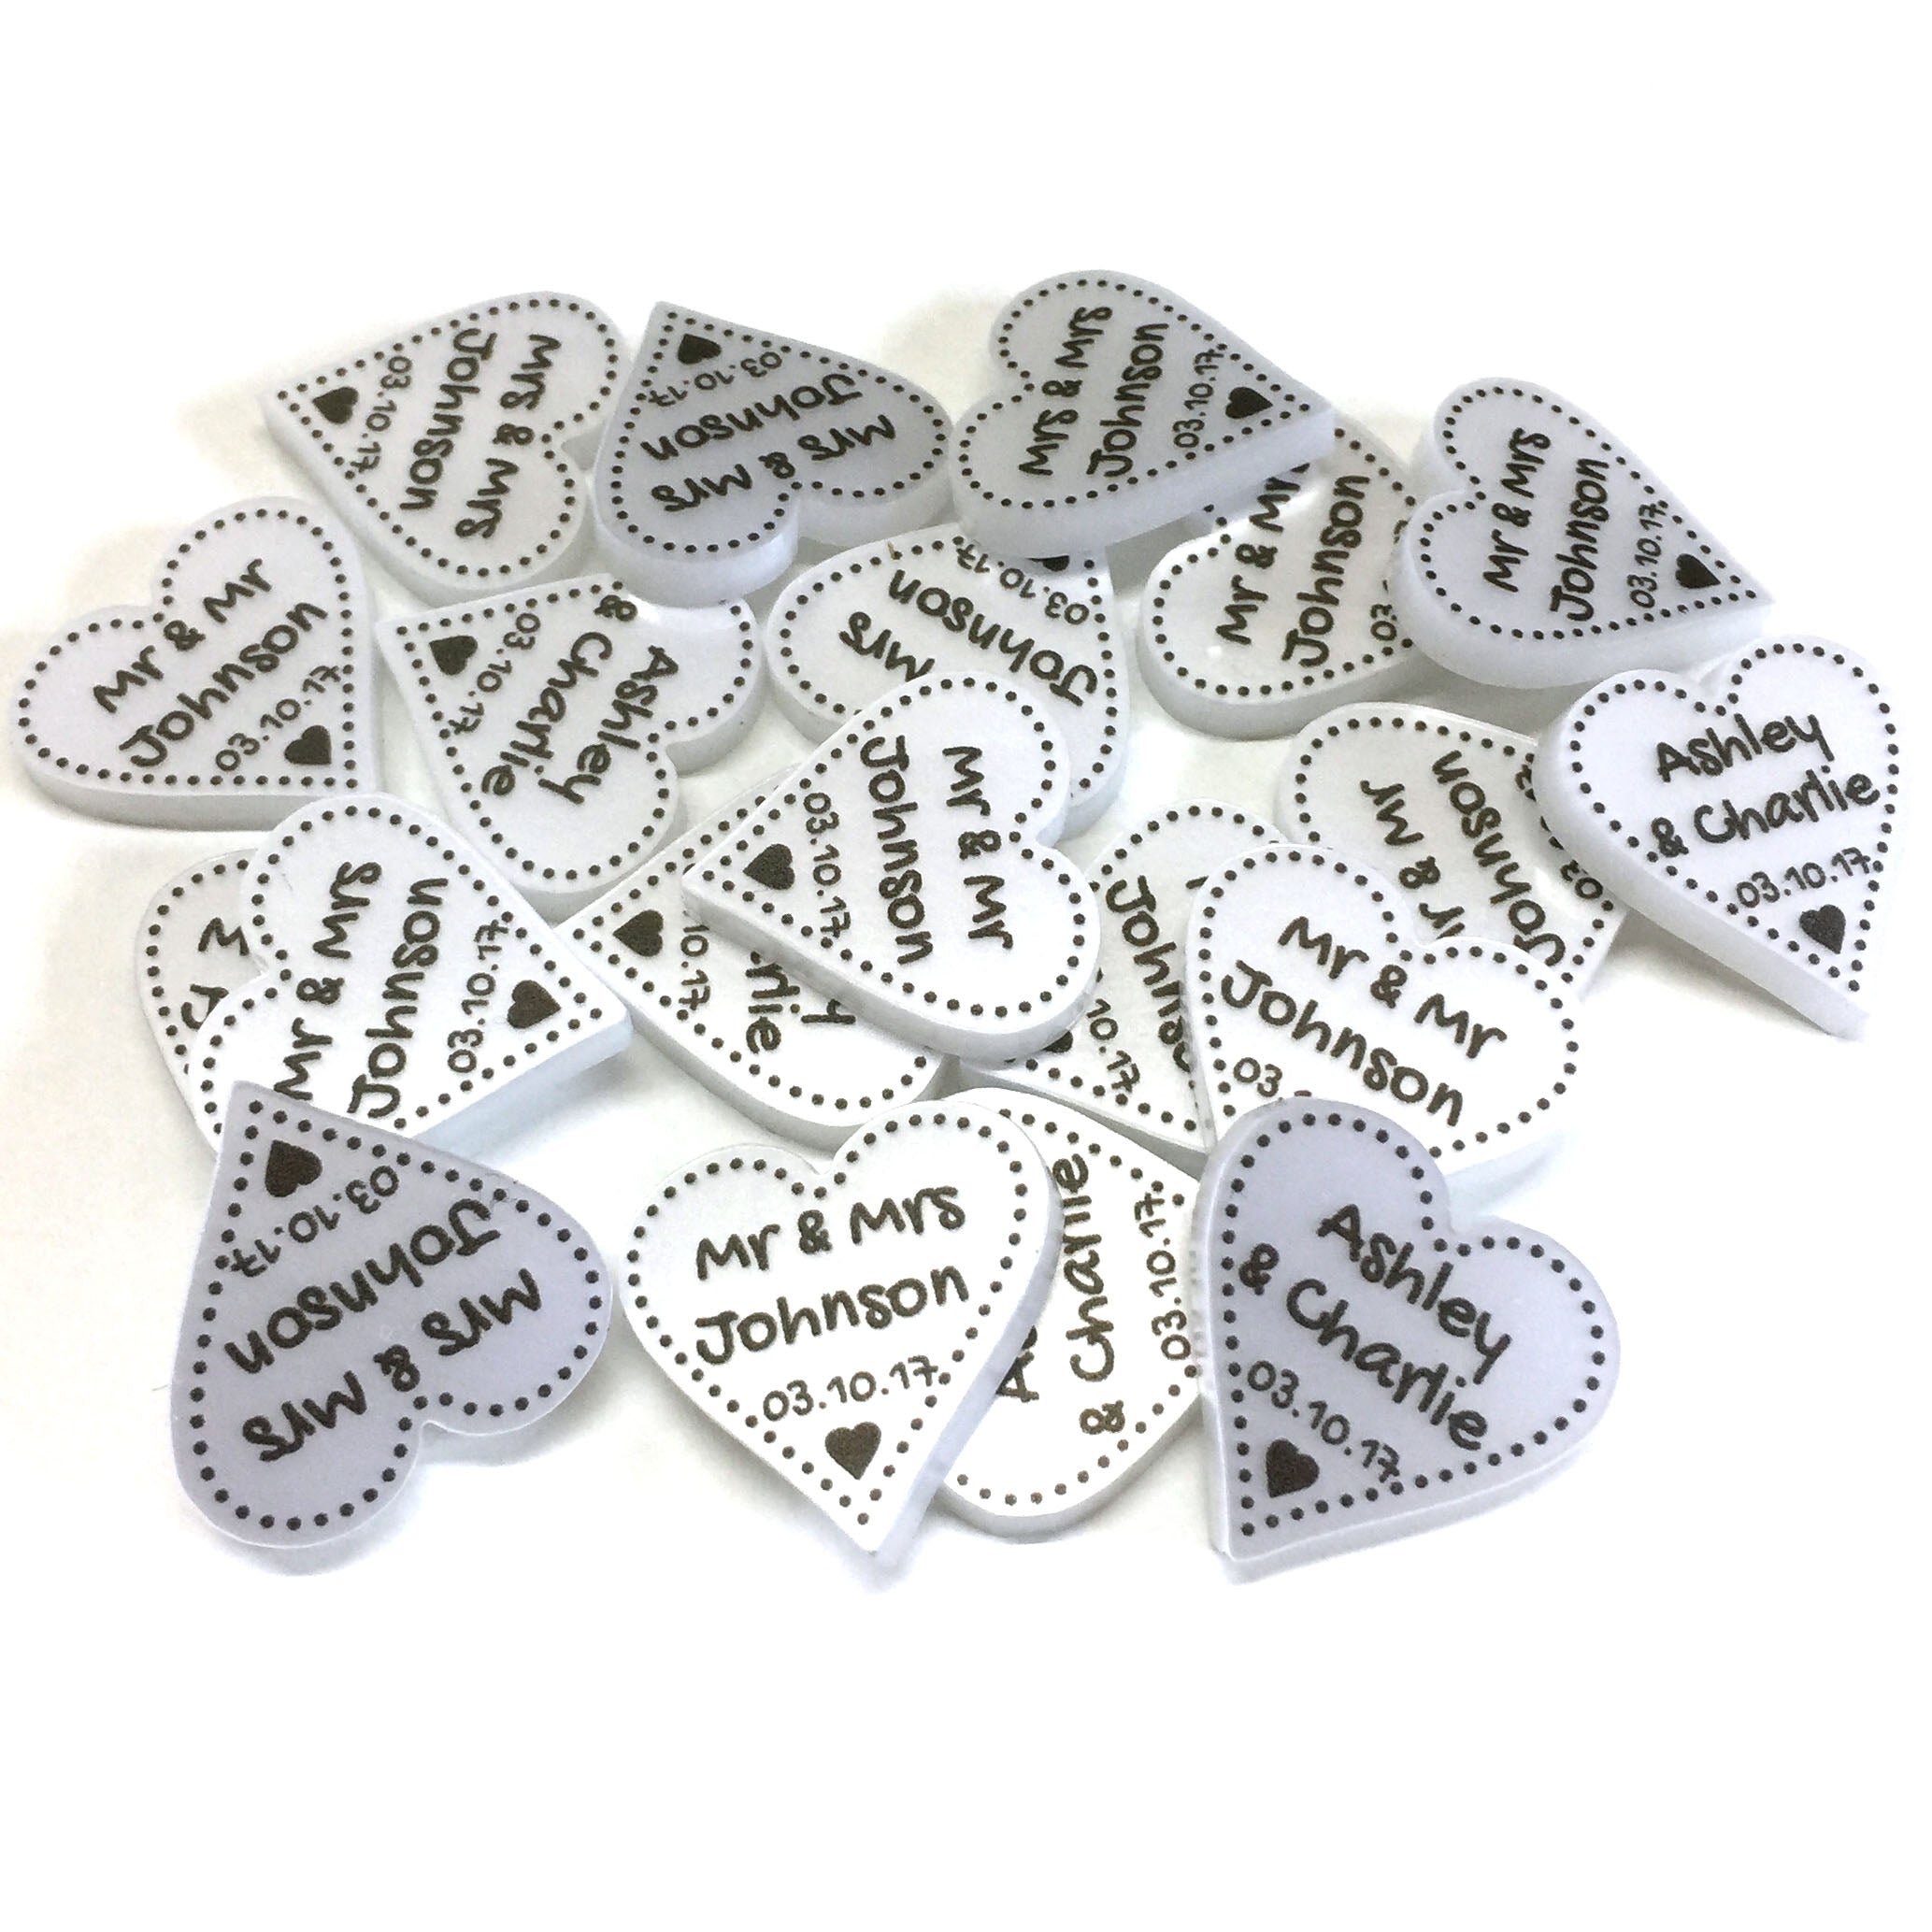 Personalised Wedding Favours - Pearlescent Acrylic + Black Dotty Love Hearts